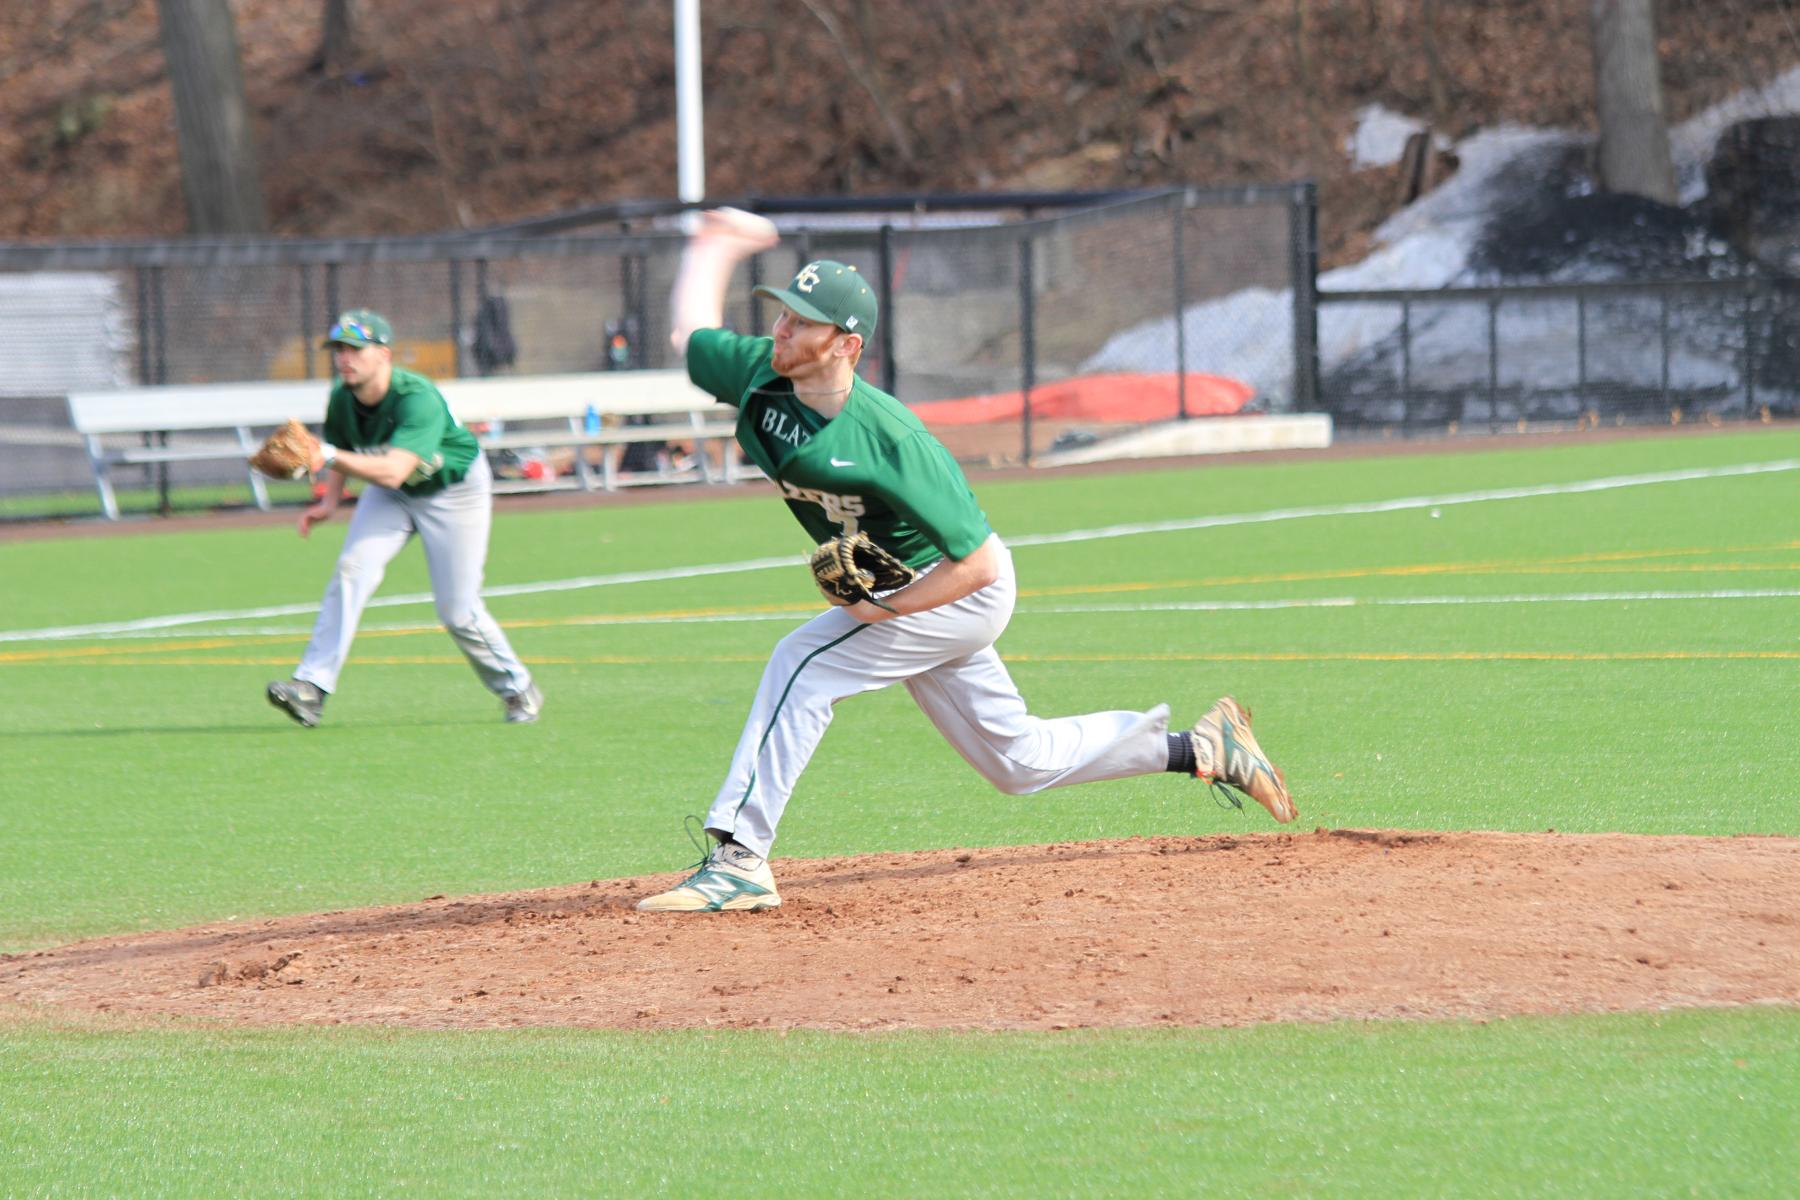 Weldon Earns Back-To-Back NECC Pitcher Honors